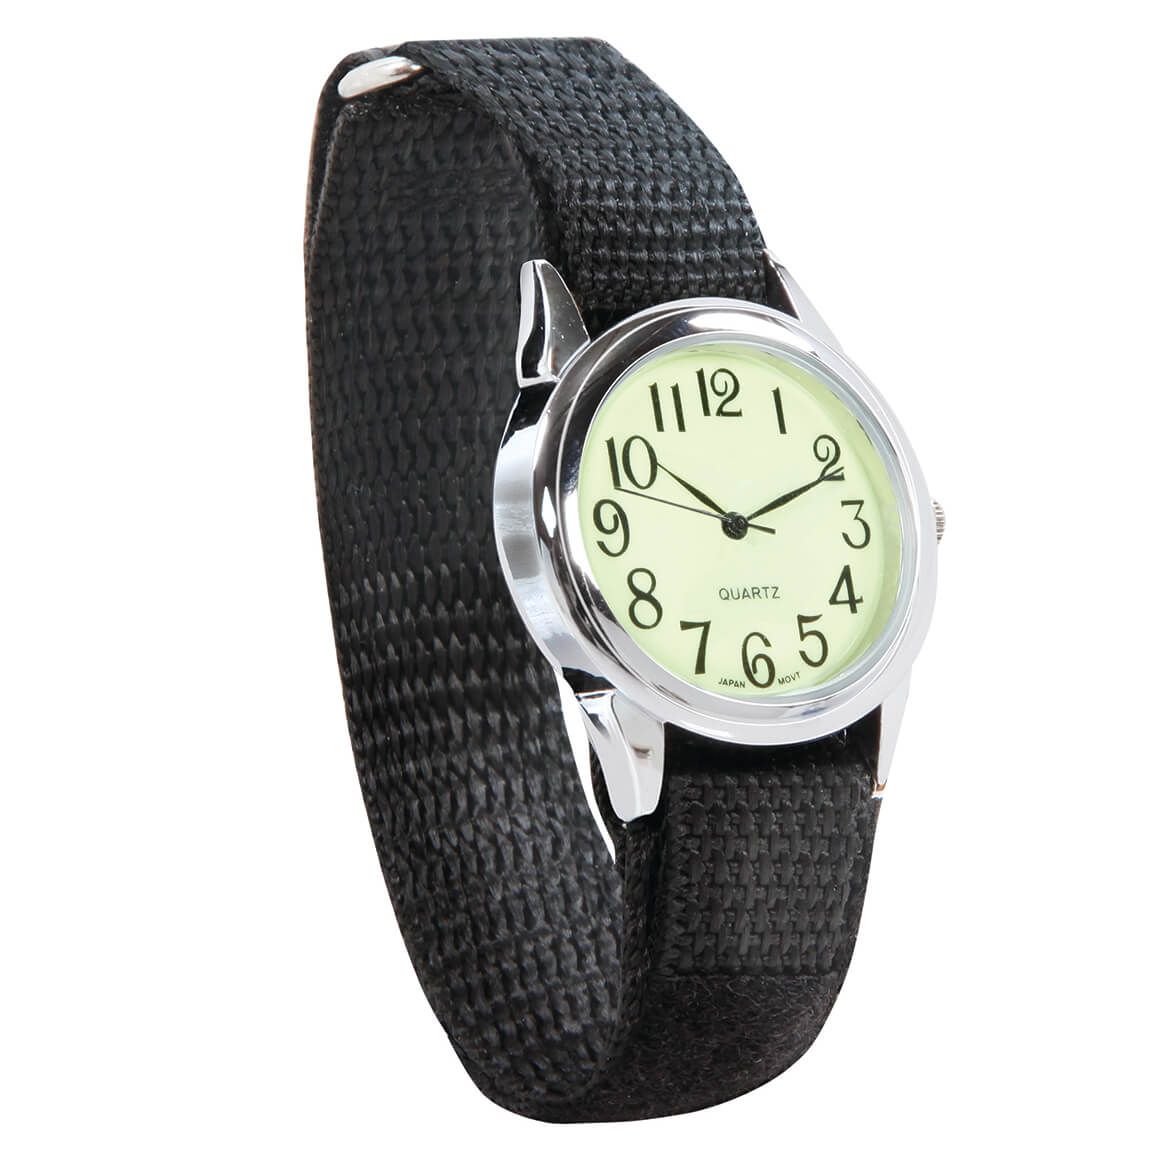 Round Gizmore Gizfit Glow Wrist Watch, For Daily at Rs 2999 in Bhandara